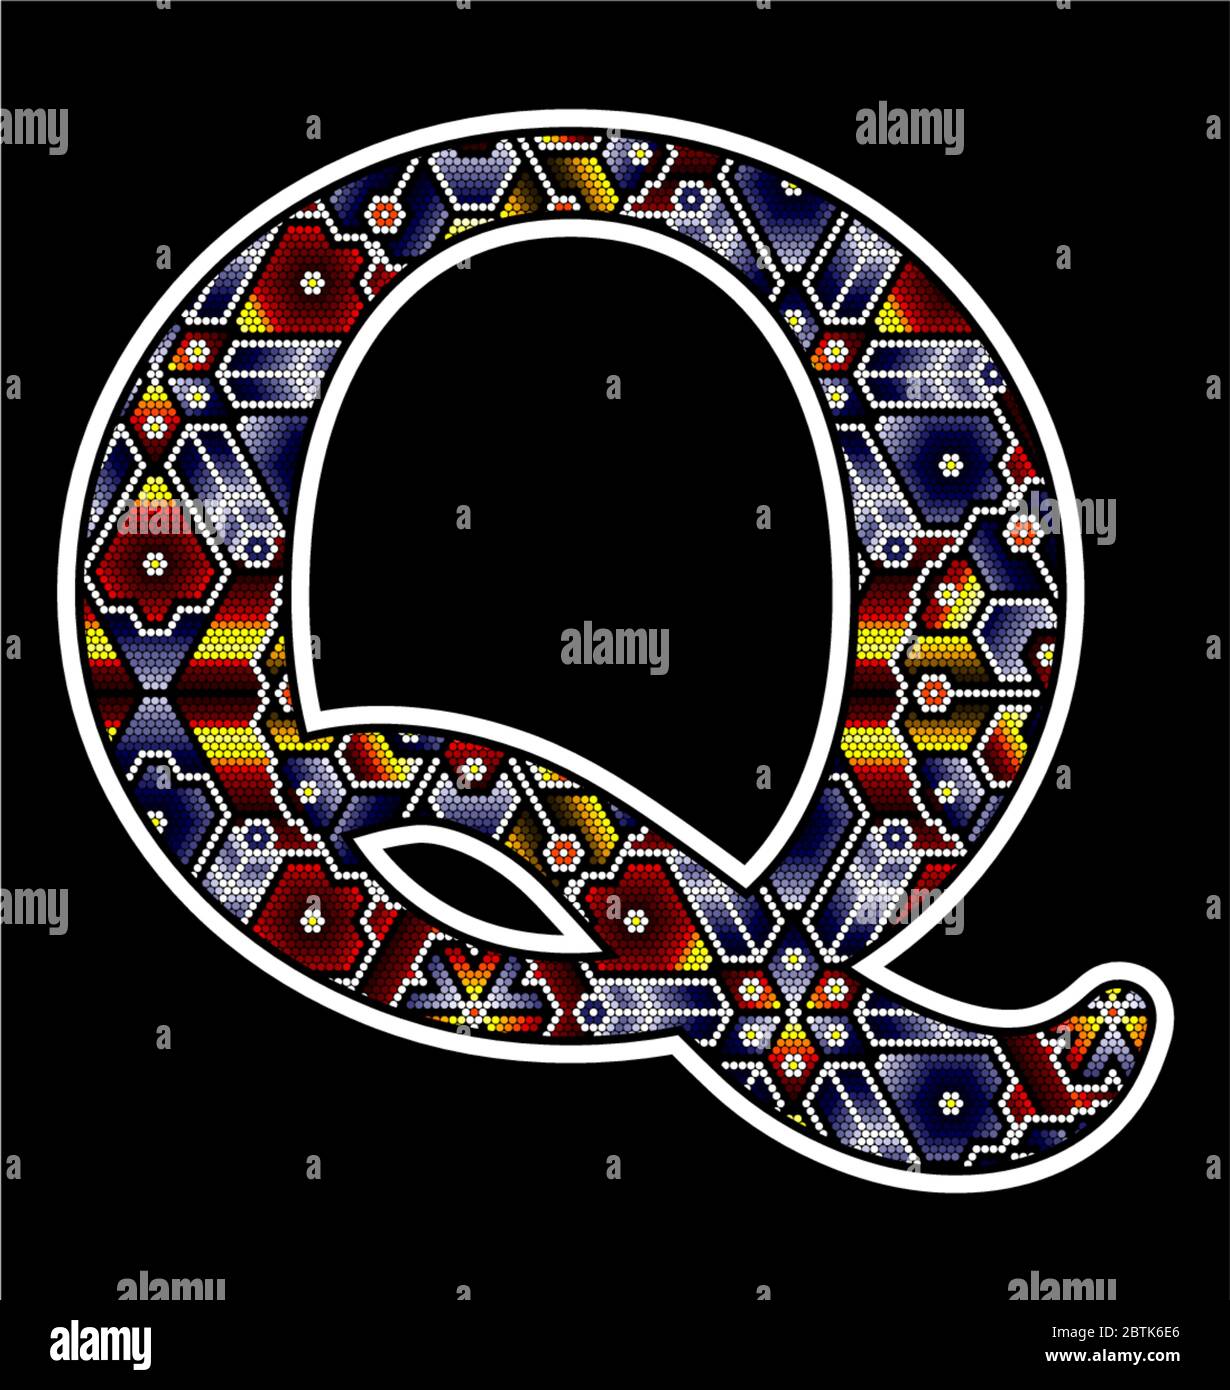 initial capital letter Q with colorful dots. Abstract design inspired in mexican huichol beaded craft art style. Isolated on black background Stock Vector